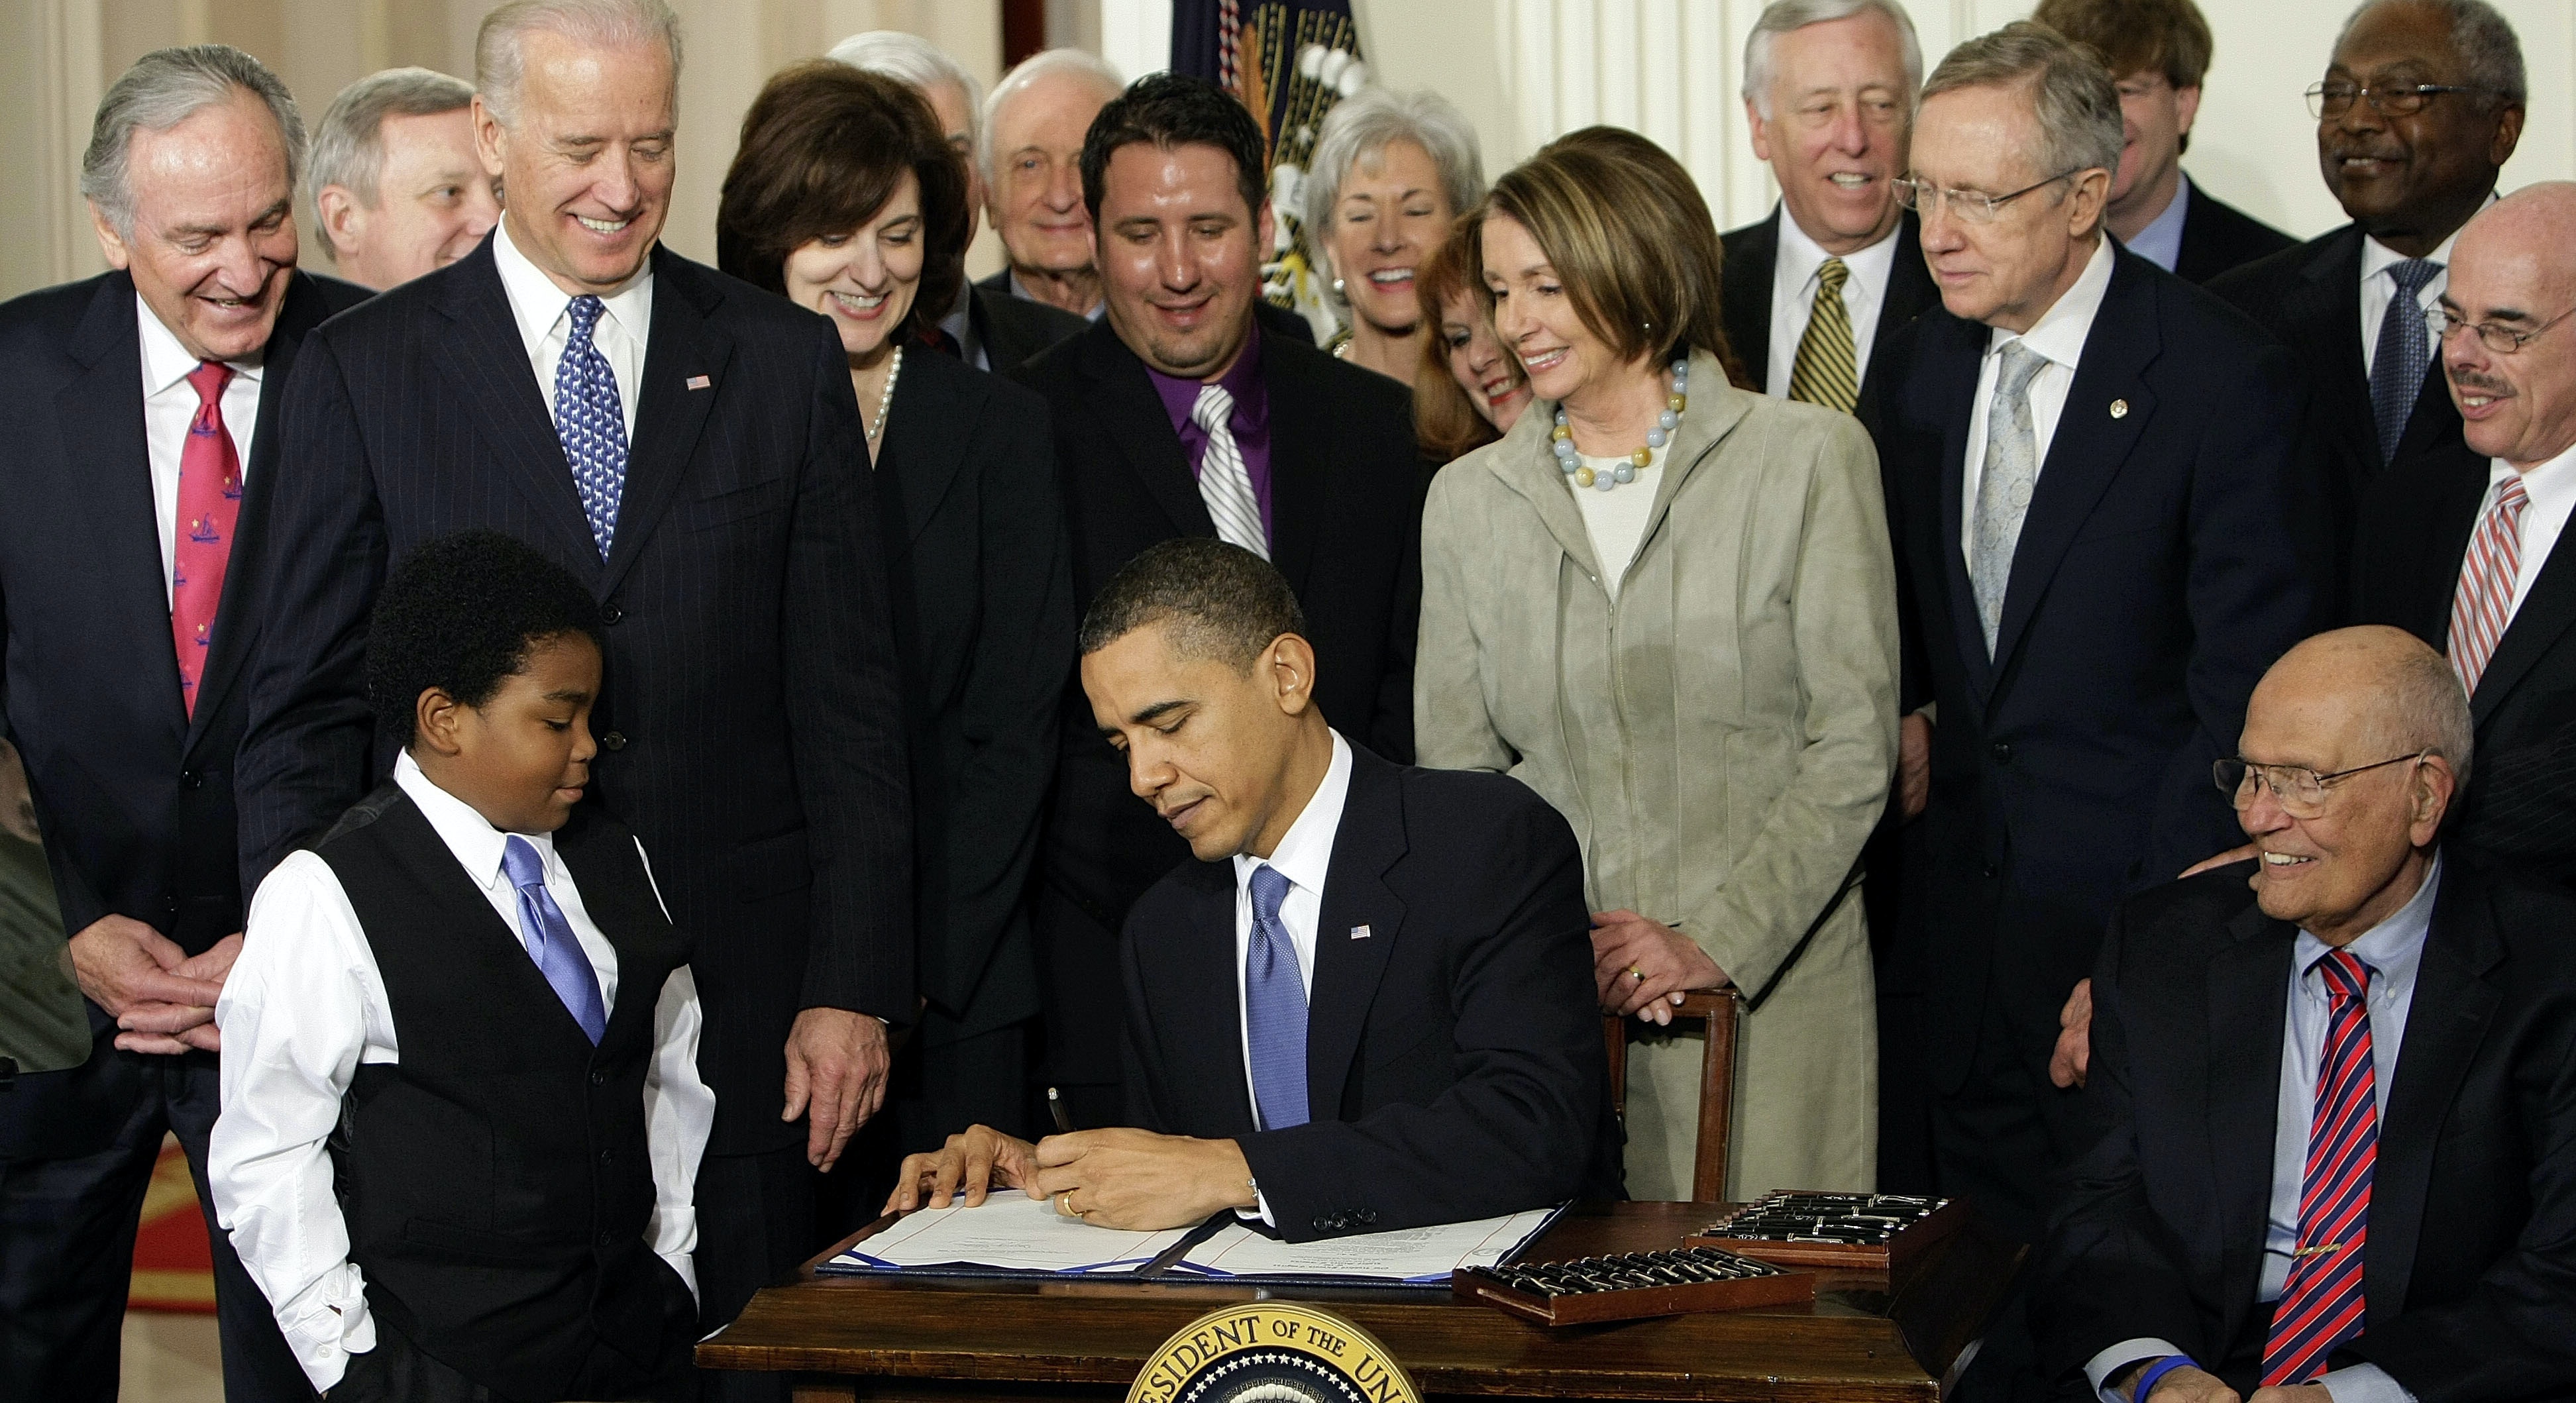 President Barack Obama is surrounded by onlookers as he signs a document. Joe Biden, Nancy Pelosi and a young Black boy in a vest and tie are part of the crowd.